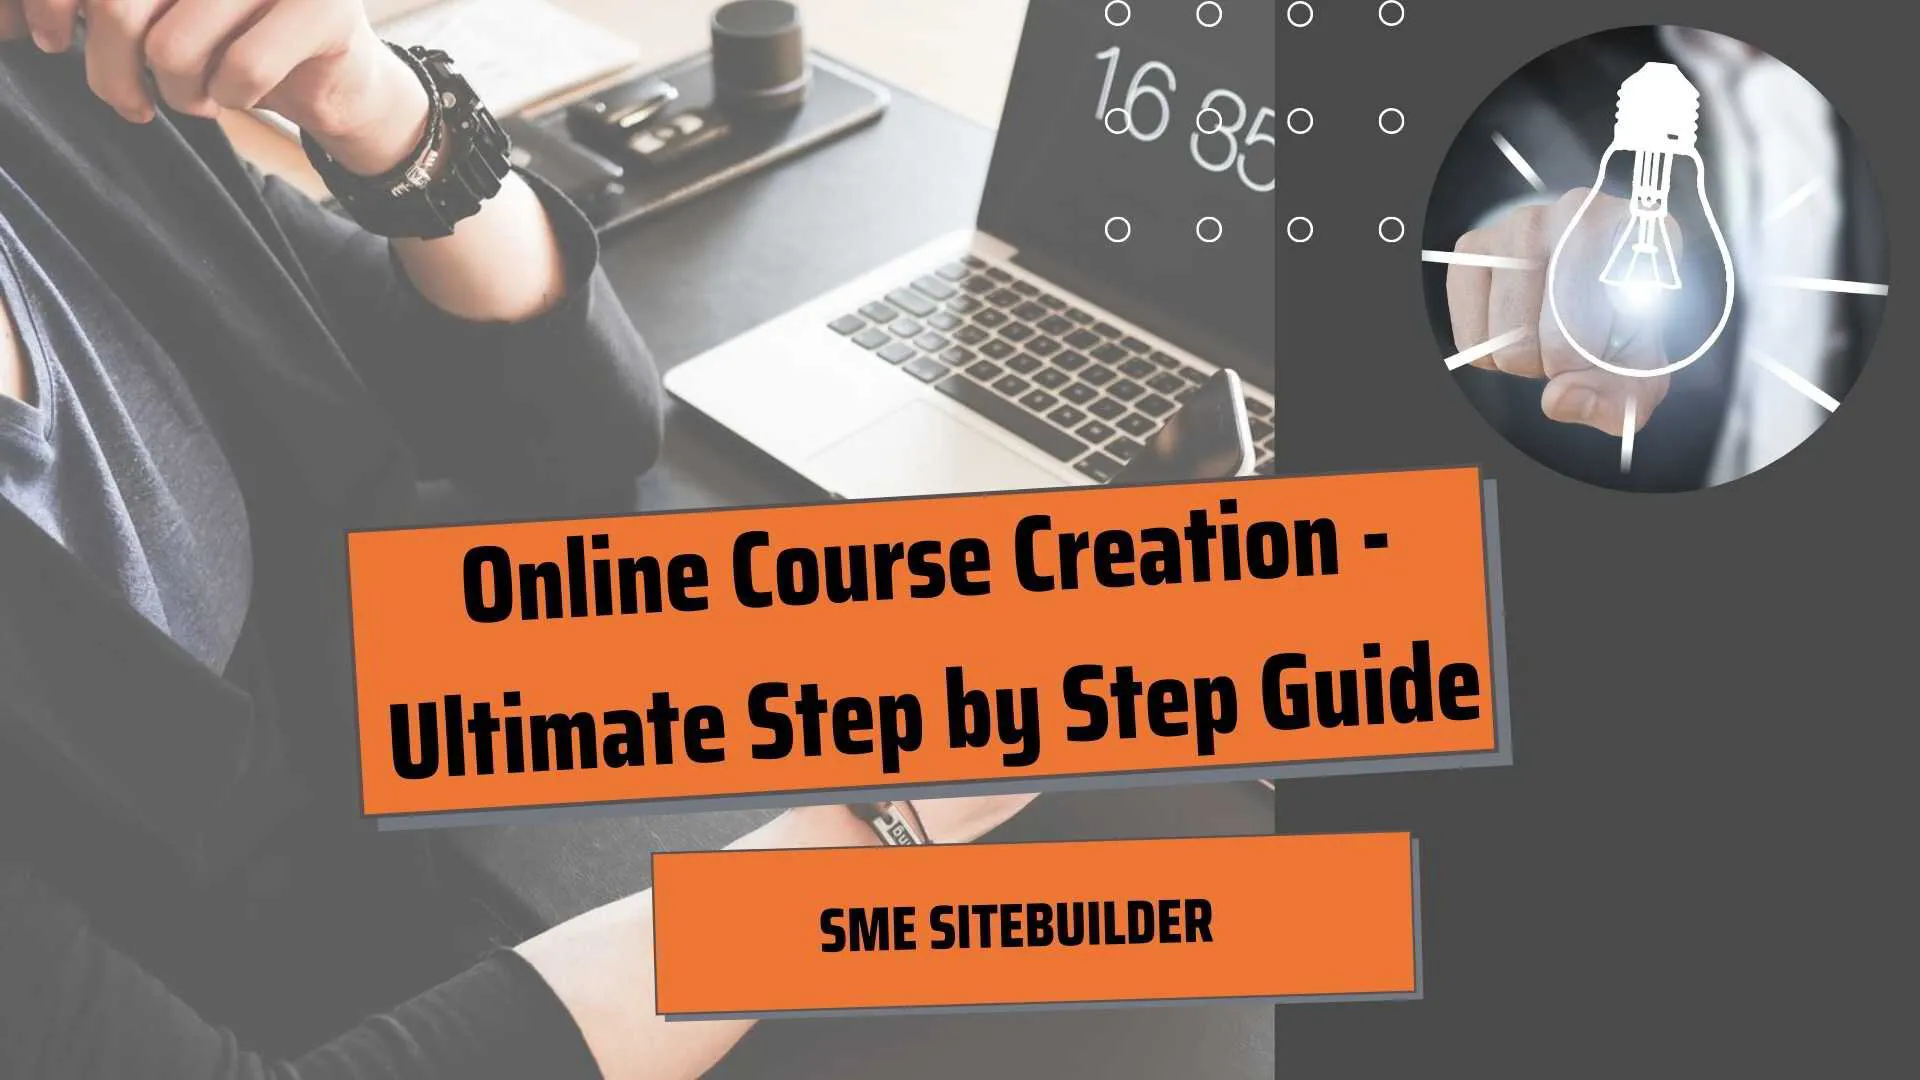 Online Course Creation - Ultimate Step by Step Guide